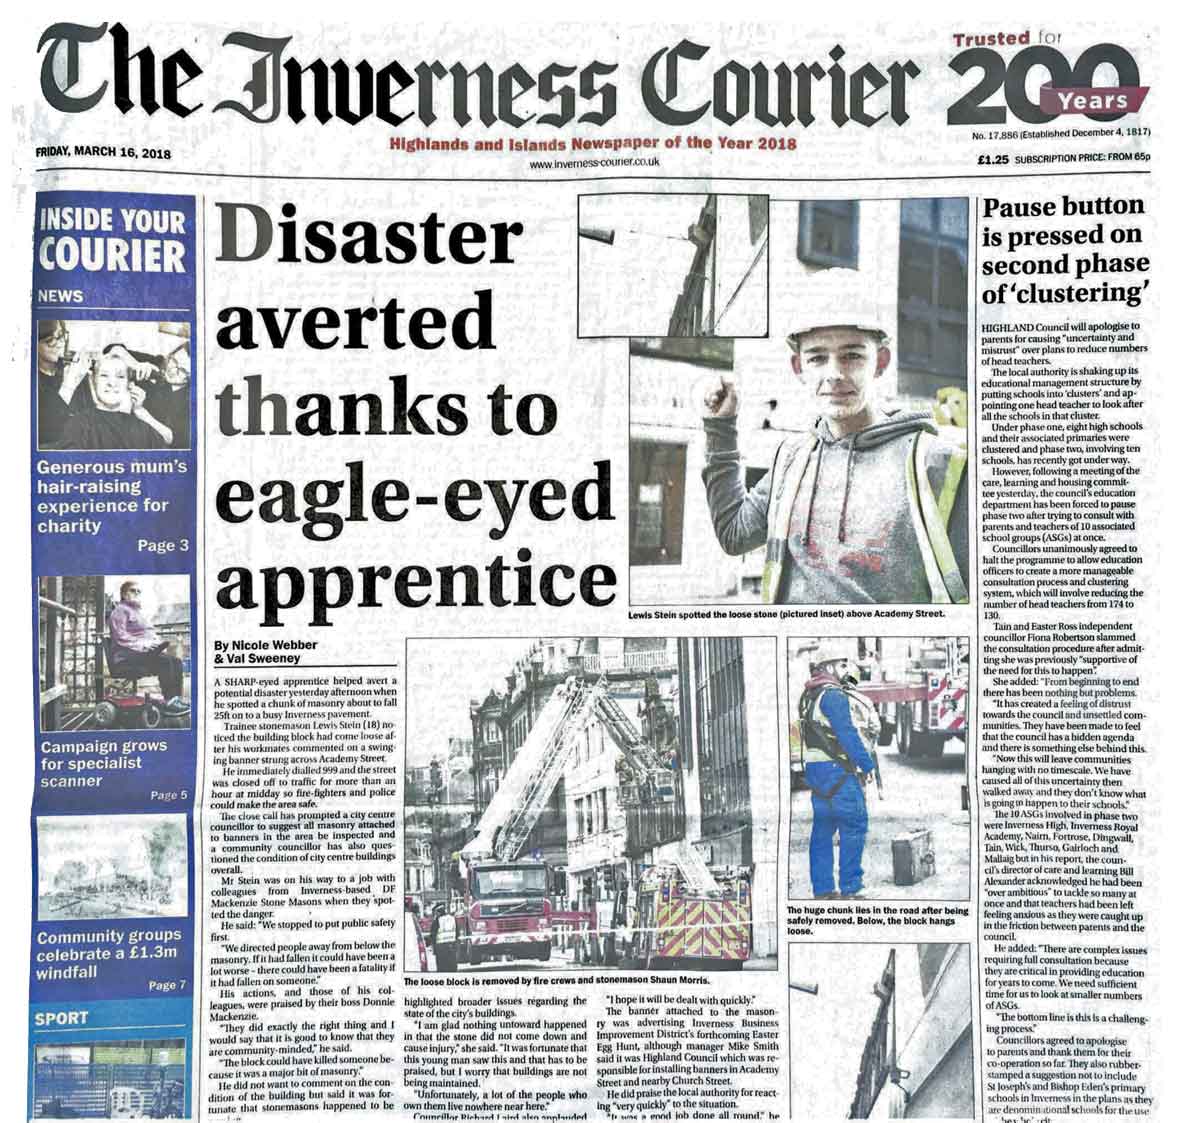 Inverness Courier Front Page reporting damage to historic architecture in the Highland Capital